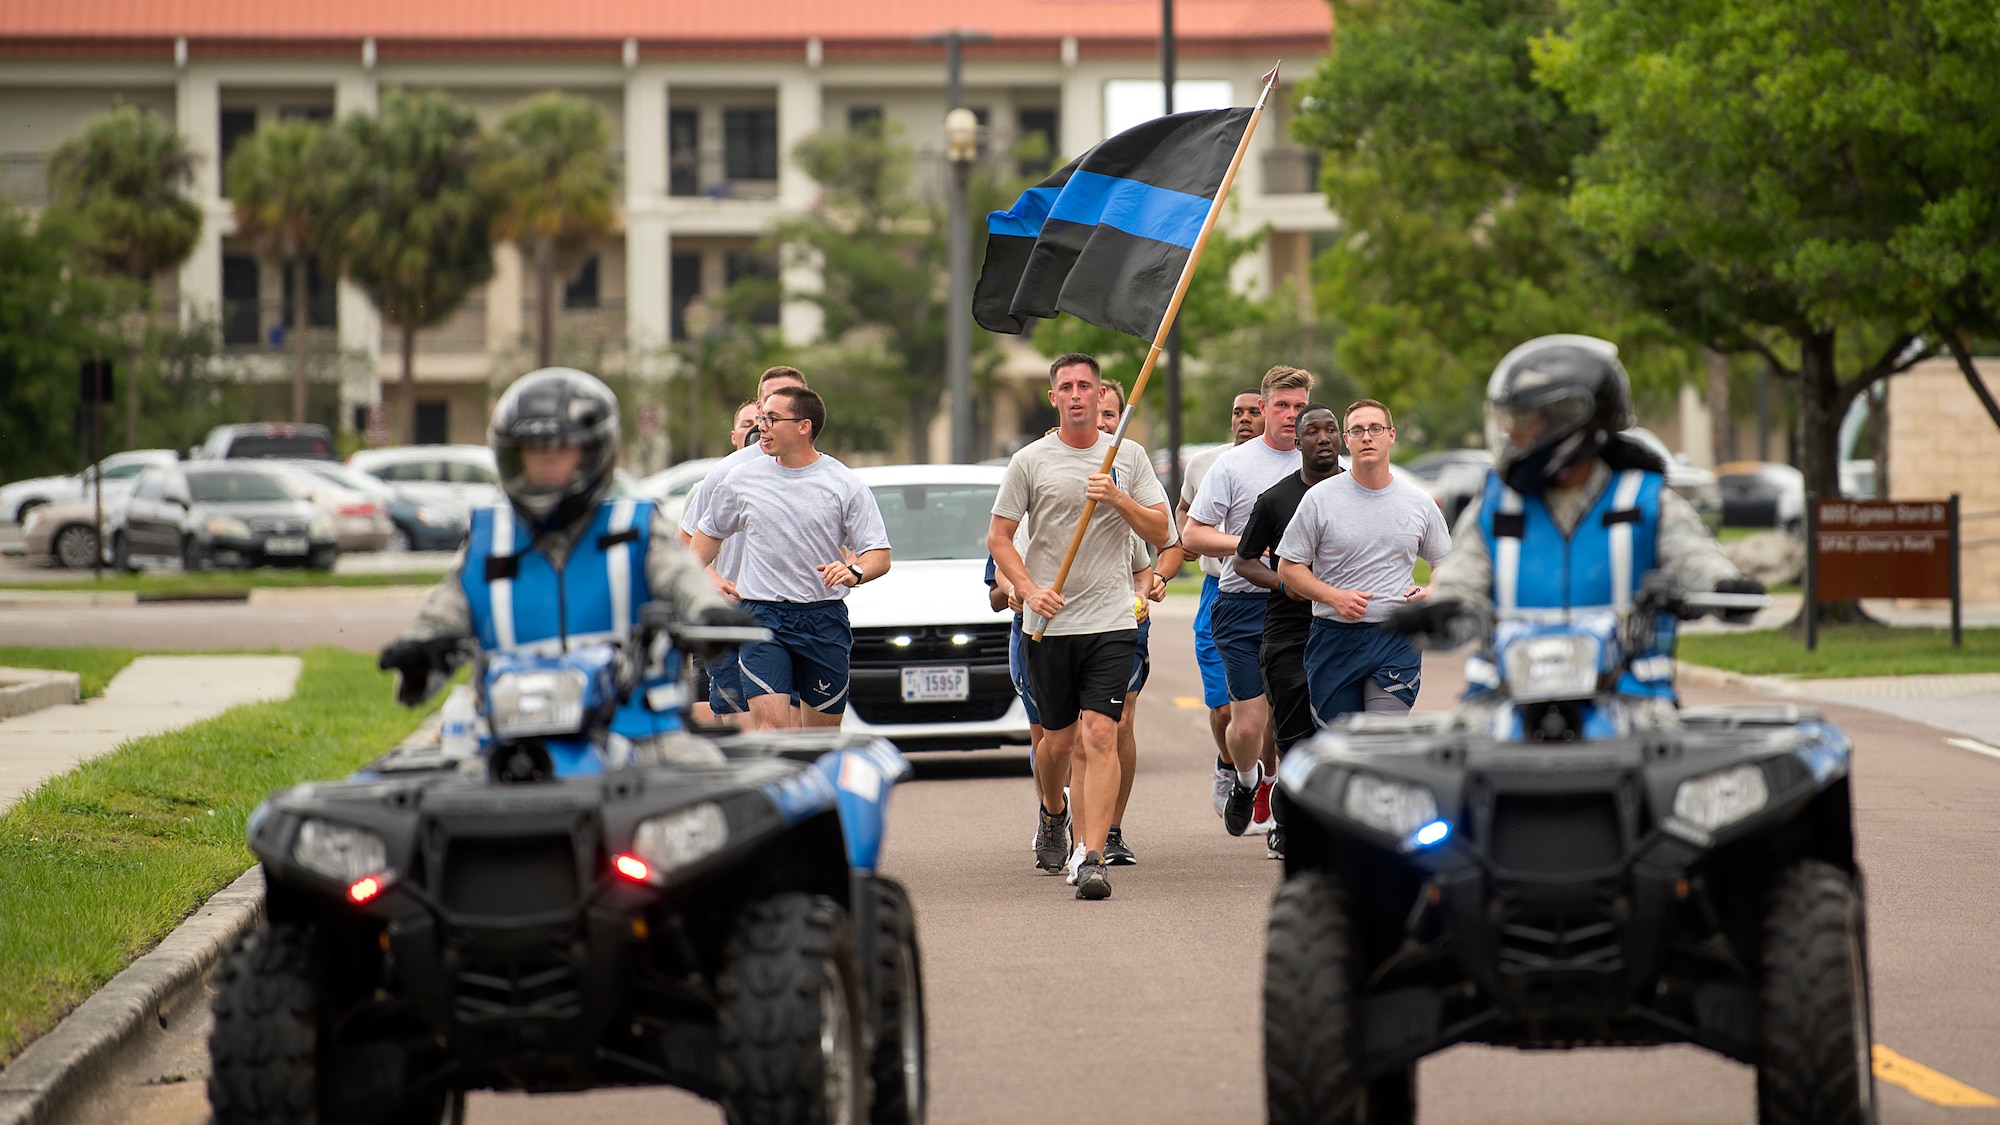 Members of the 6th Security Forces Squadron participate in a 24-hour vigilance run to commemorate Police Week at MacDill Air Force Base, Fla., May 22, 2018. Police Week is a national observance that pays tribute to the law enforcement officers who have lost their lives in the line of duty for the safety and protection of others.